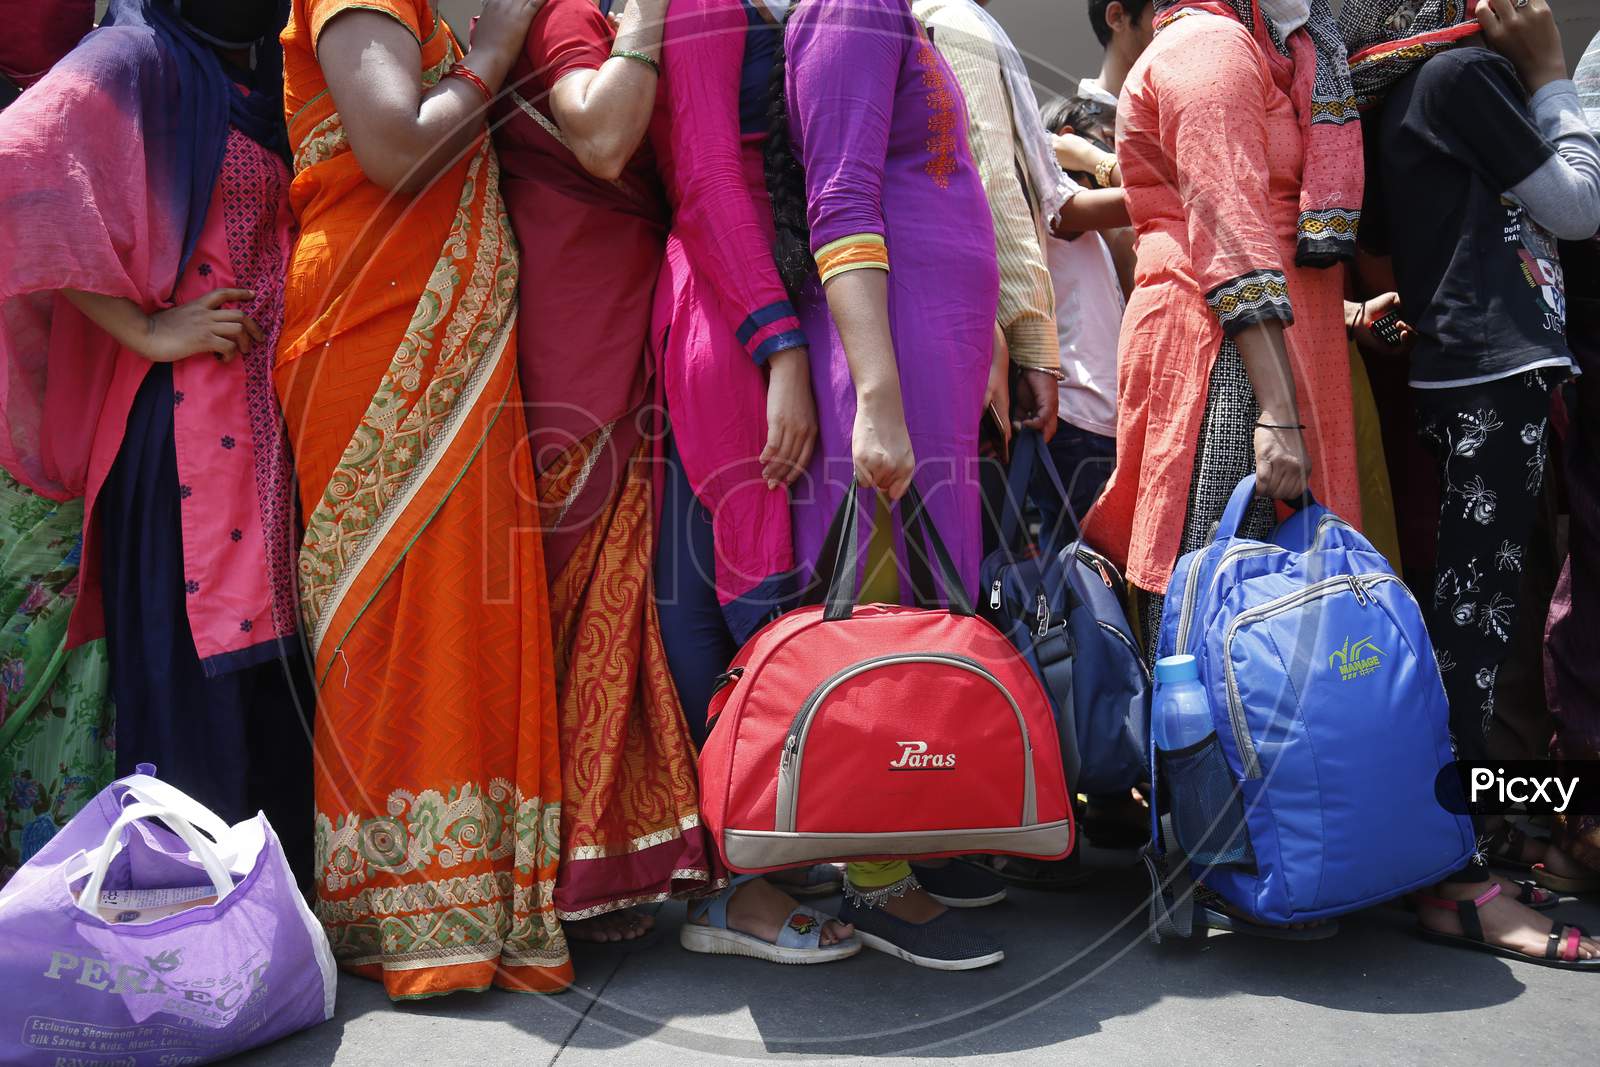 People wait in a queue to board public transport buses during the nationwide lockdown to stop the spread of Coronavirus (COVID-19) in Bangalore, India, May 03, 2020.